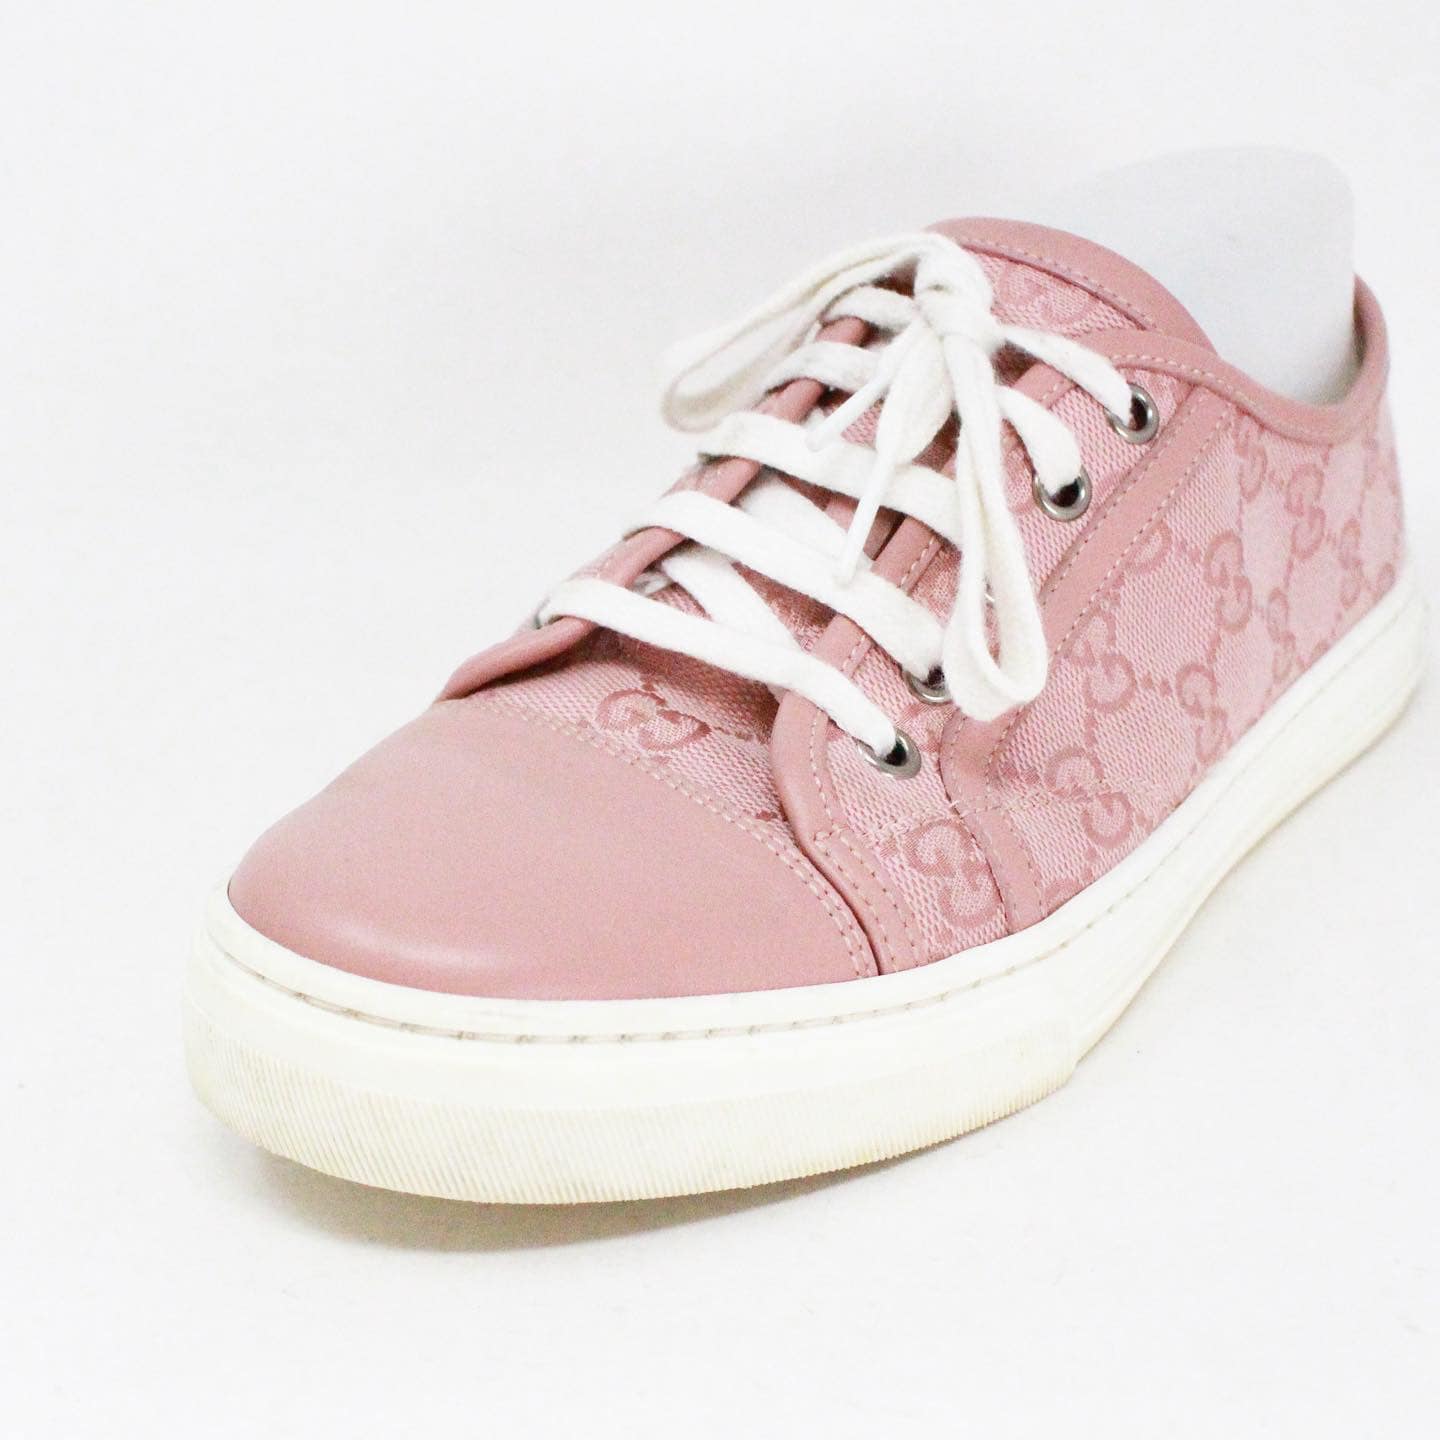 Gucci, Shoes, Gucci Pink Gg Monogram Sneakers